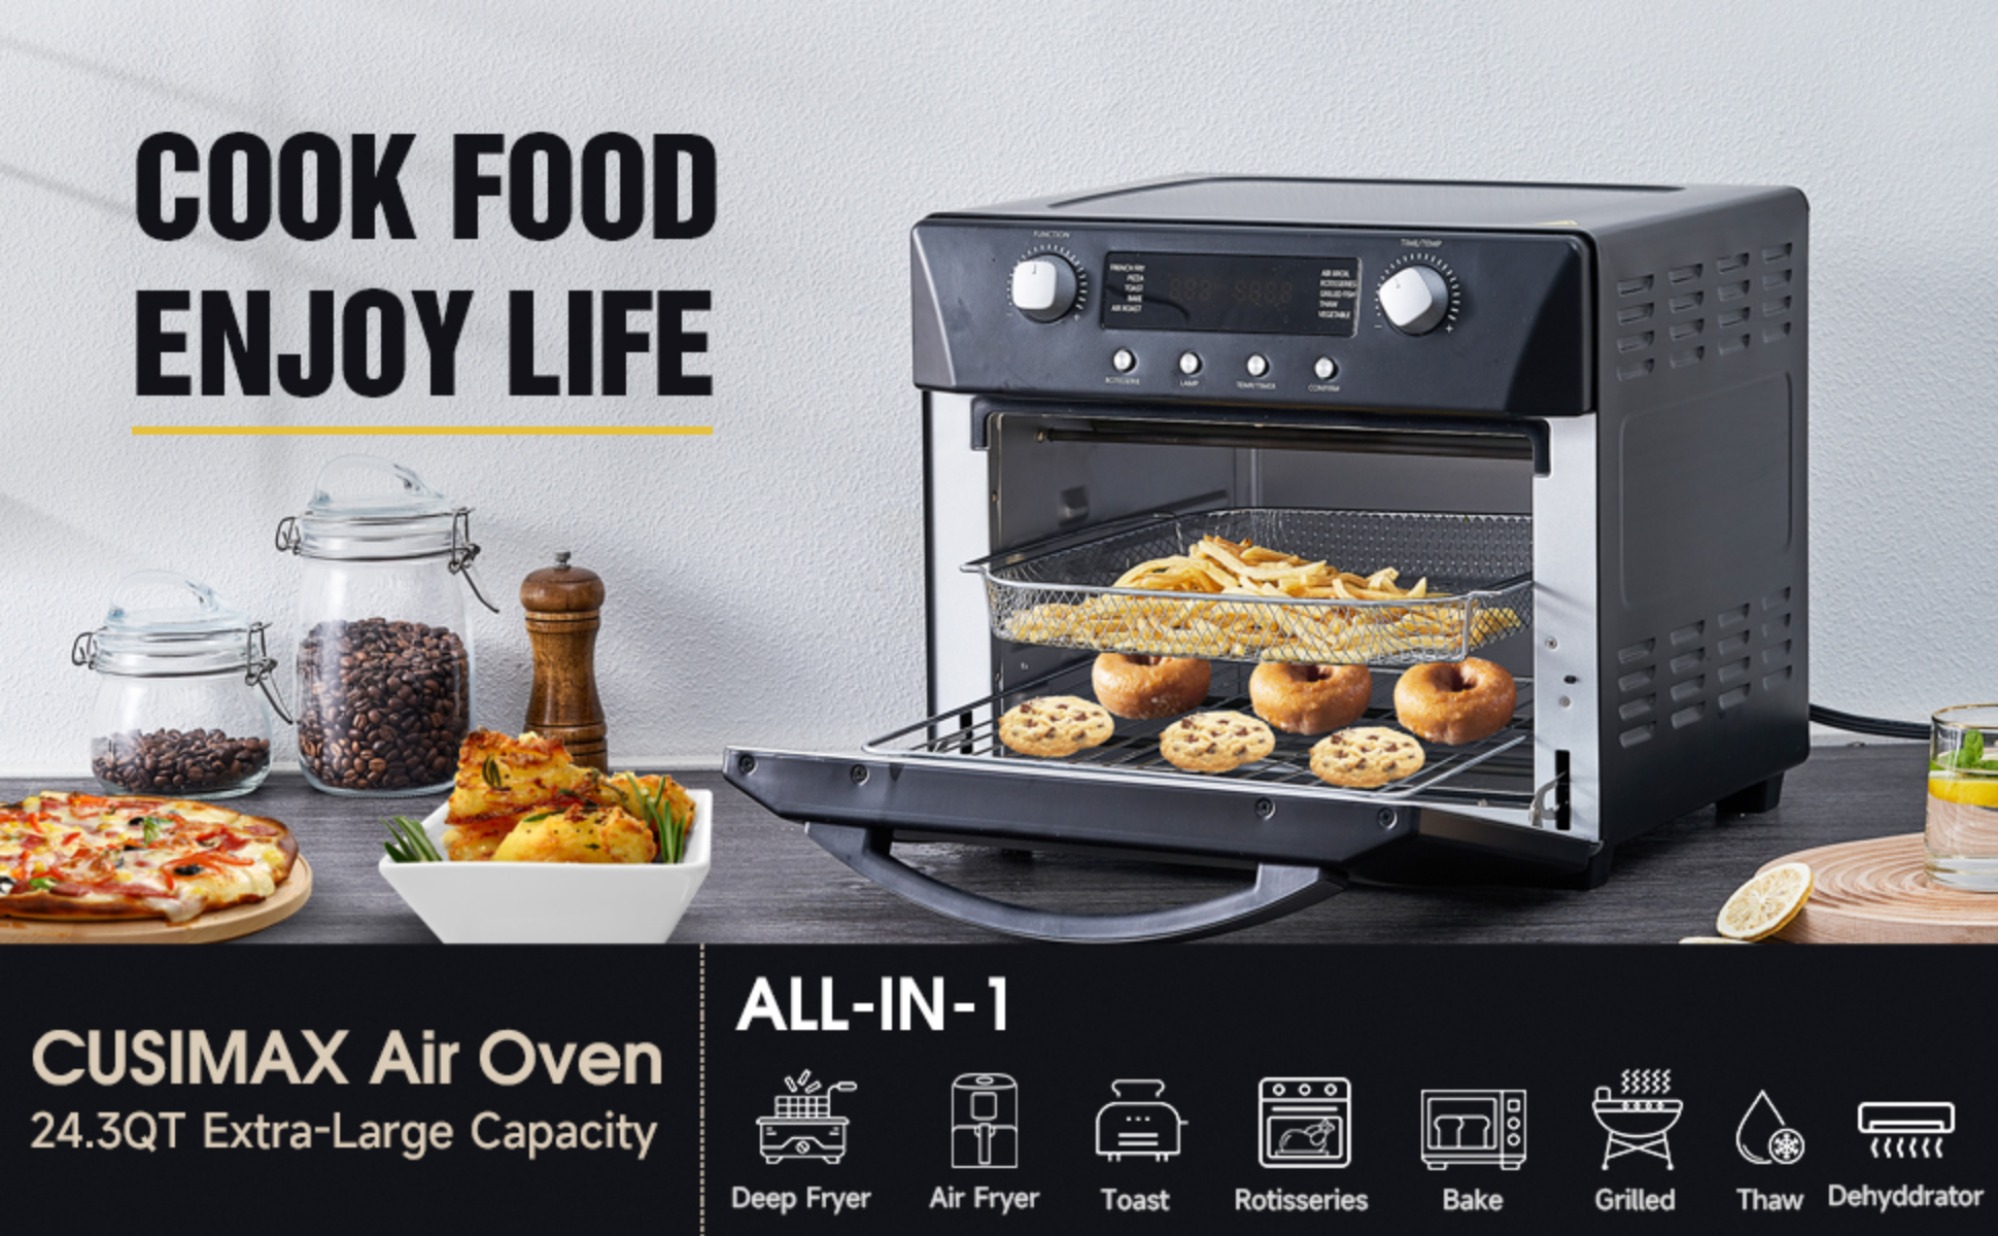 CUSIMAX 3 Layer Shelf Air Fryer Convection Oven 16-in-1 14.7 Liter